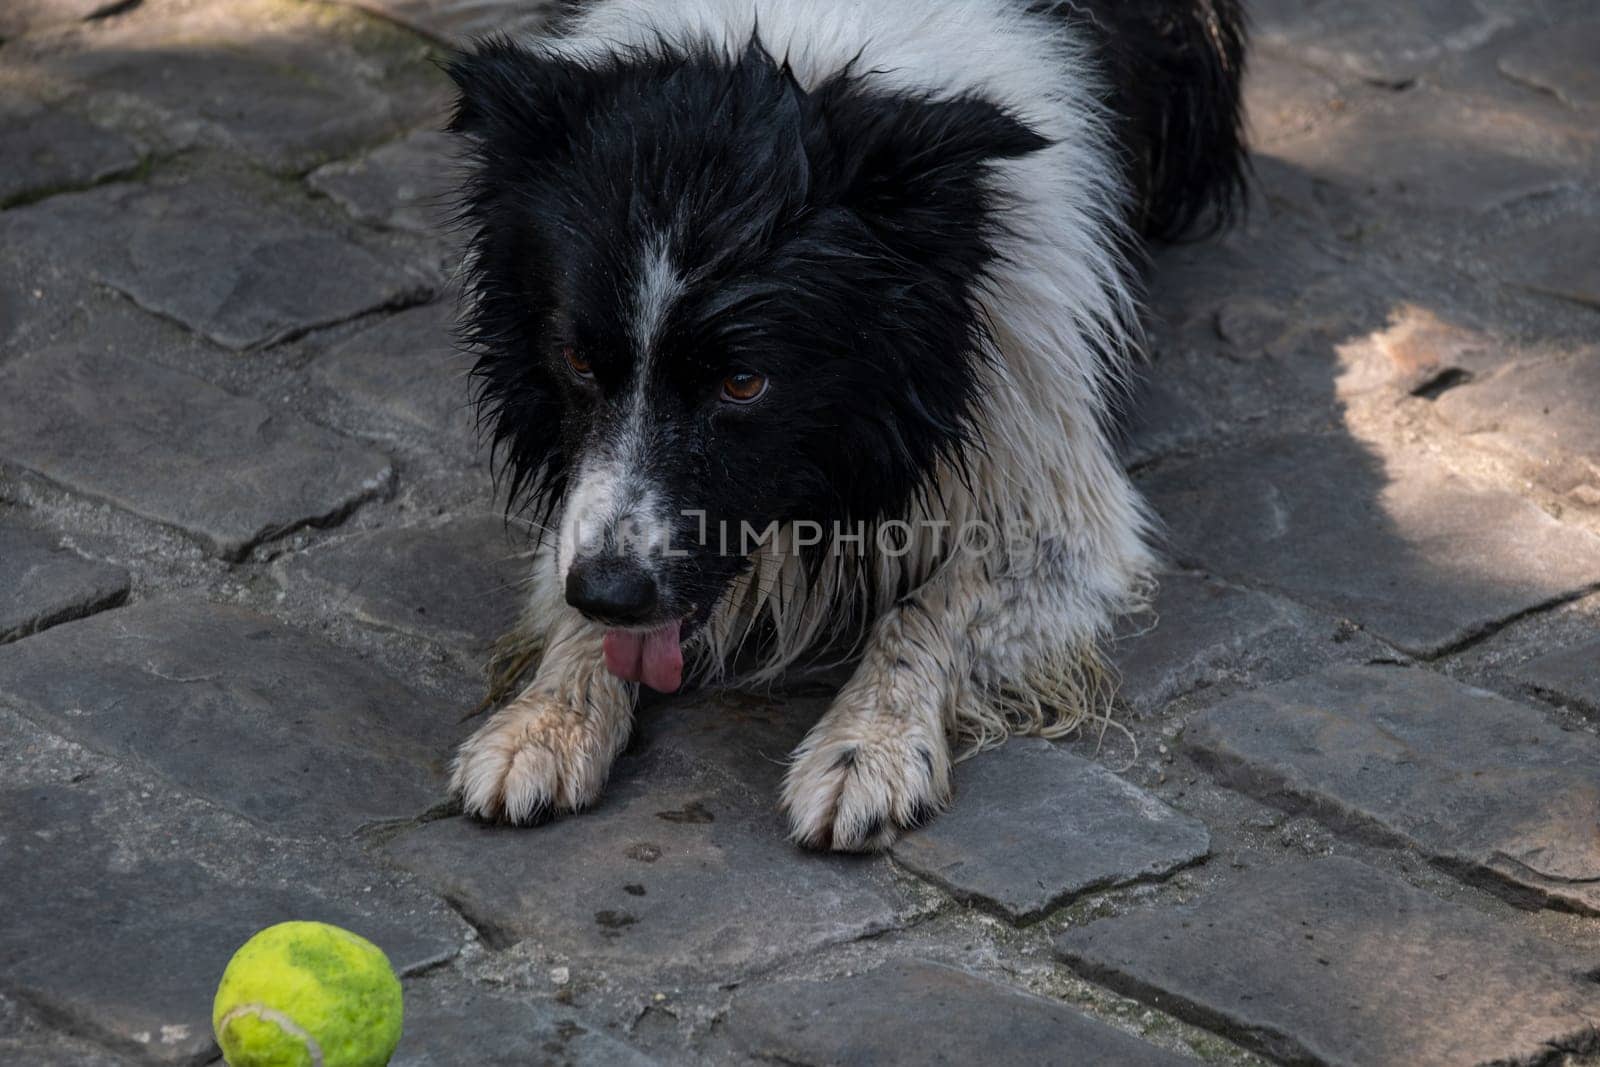 Playful, wet border collie crouches on cobblestone pavement with a tennis ball by its paws waiting for someone to throw it. Dog has its eyes intensely focused on the ball.